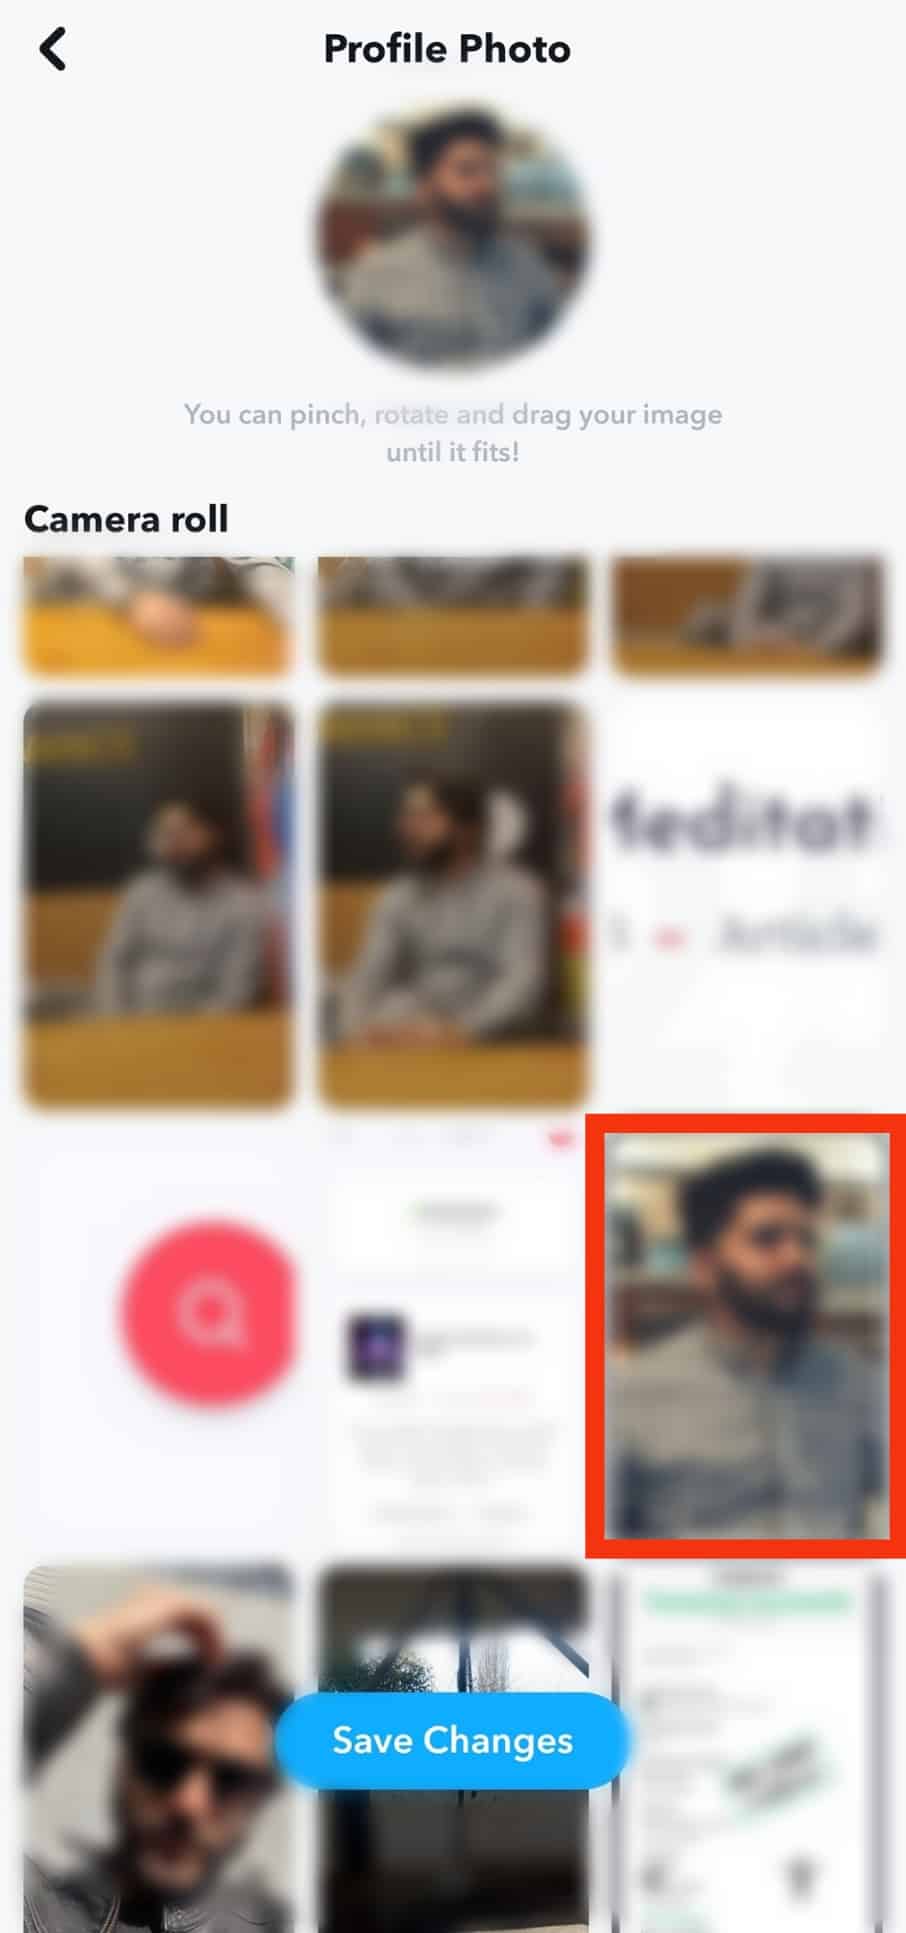 Select Photo From Your Camera Roll